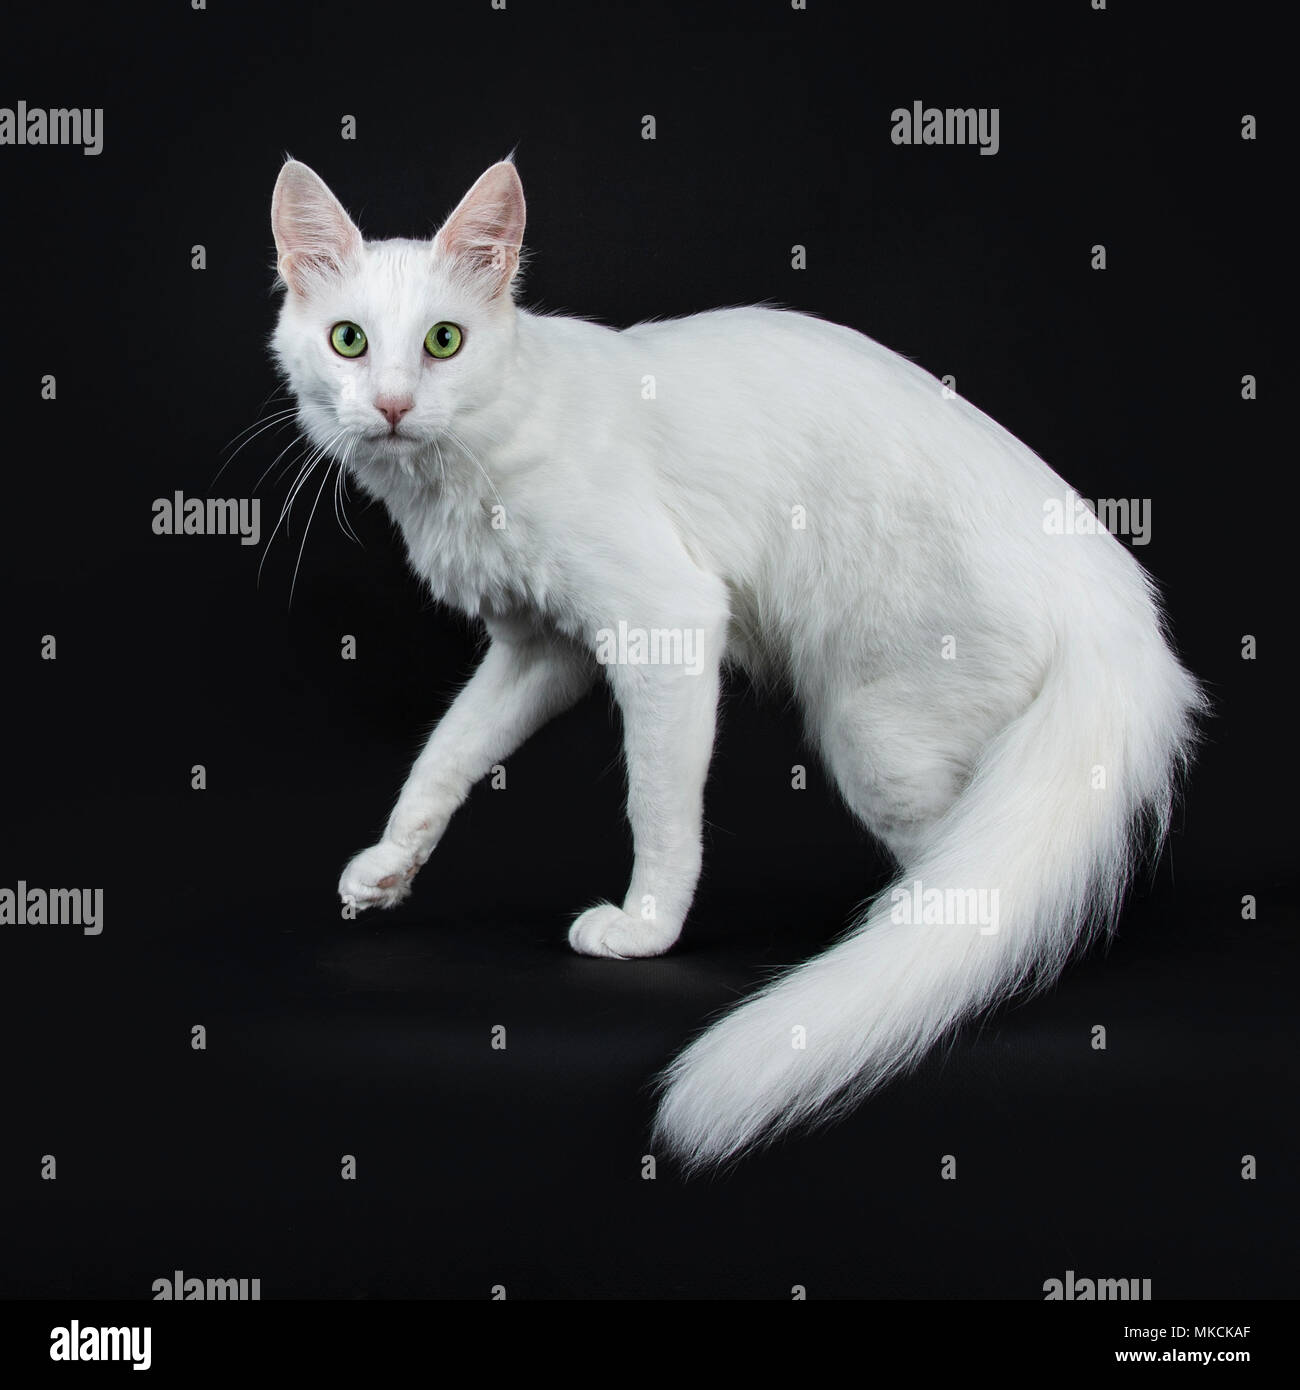 Solid white Turkish Angora cat with green eyes walking side ways isolated on black background looking straight in camera with tail hanging down Stock Photo